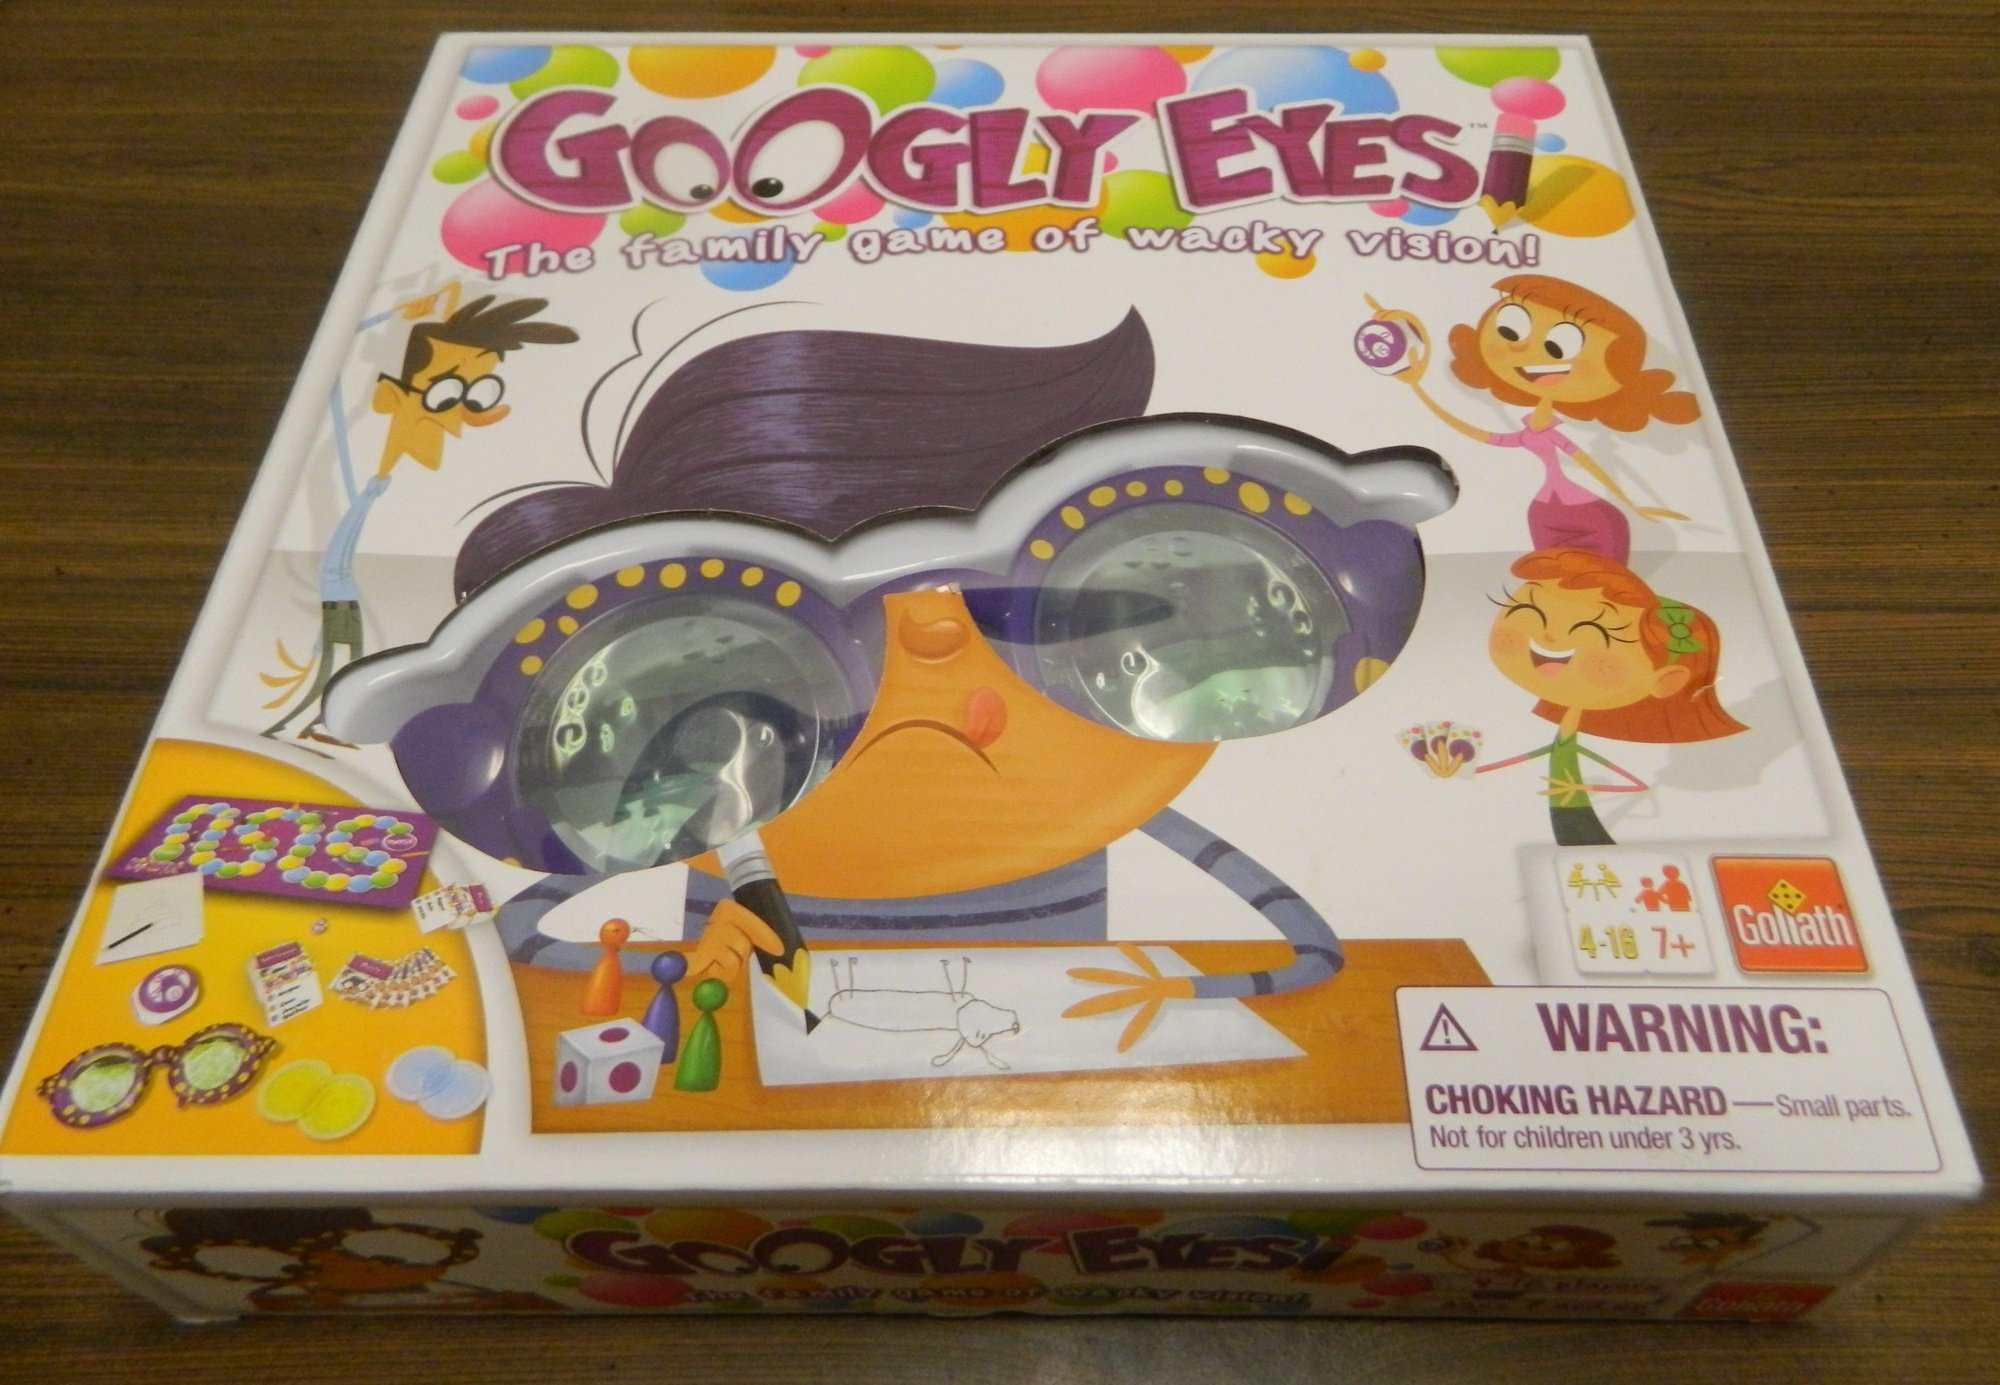 Googly Eyes Board Game Review and Rules